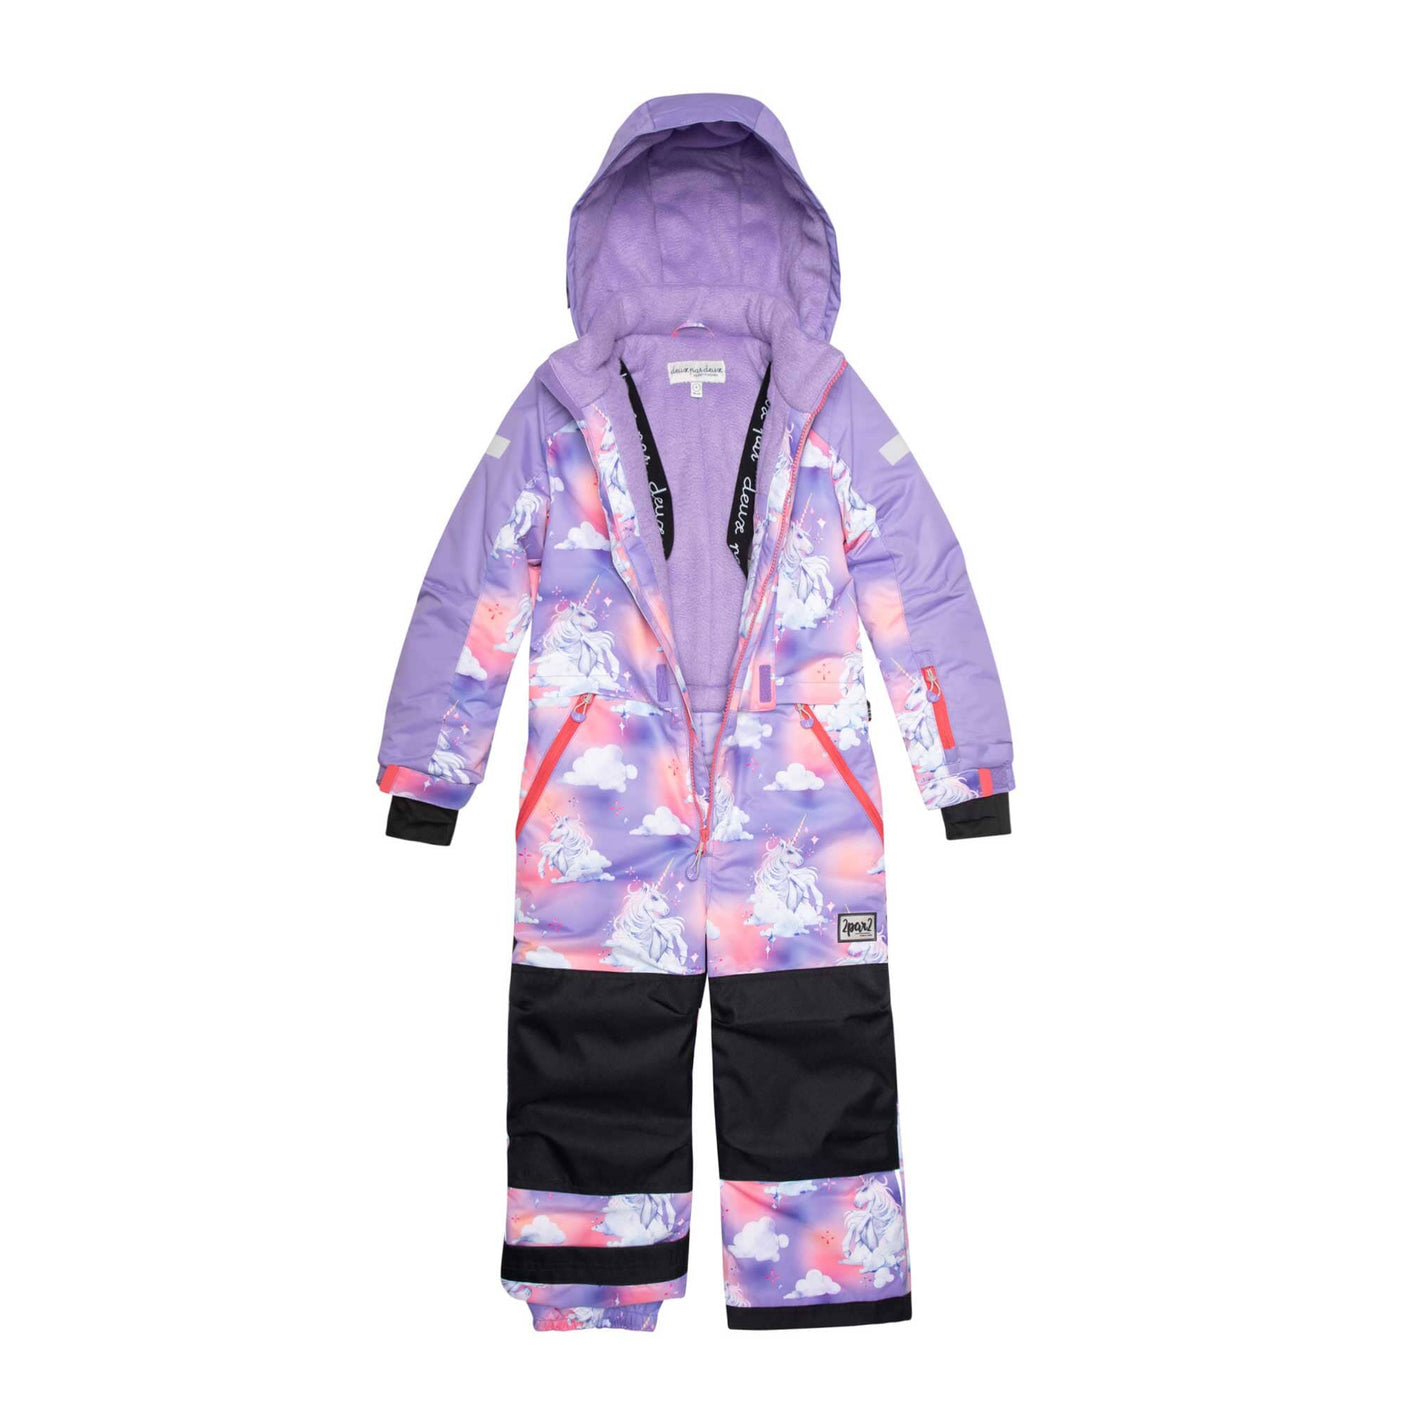 One Piece Lavender Snowsuit With Unicorns In The Cloud Print-3